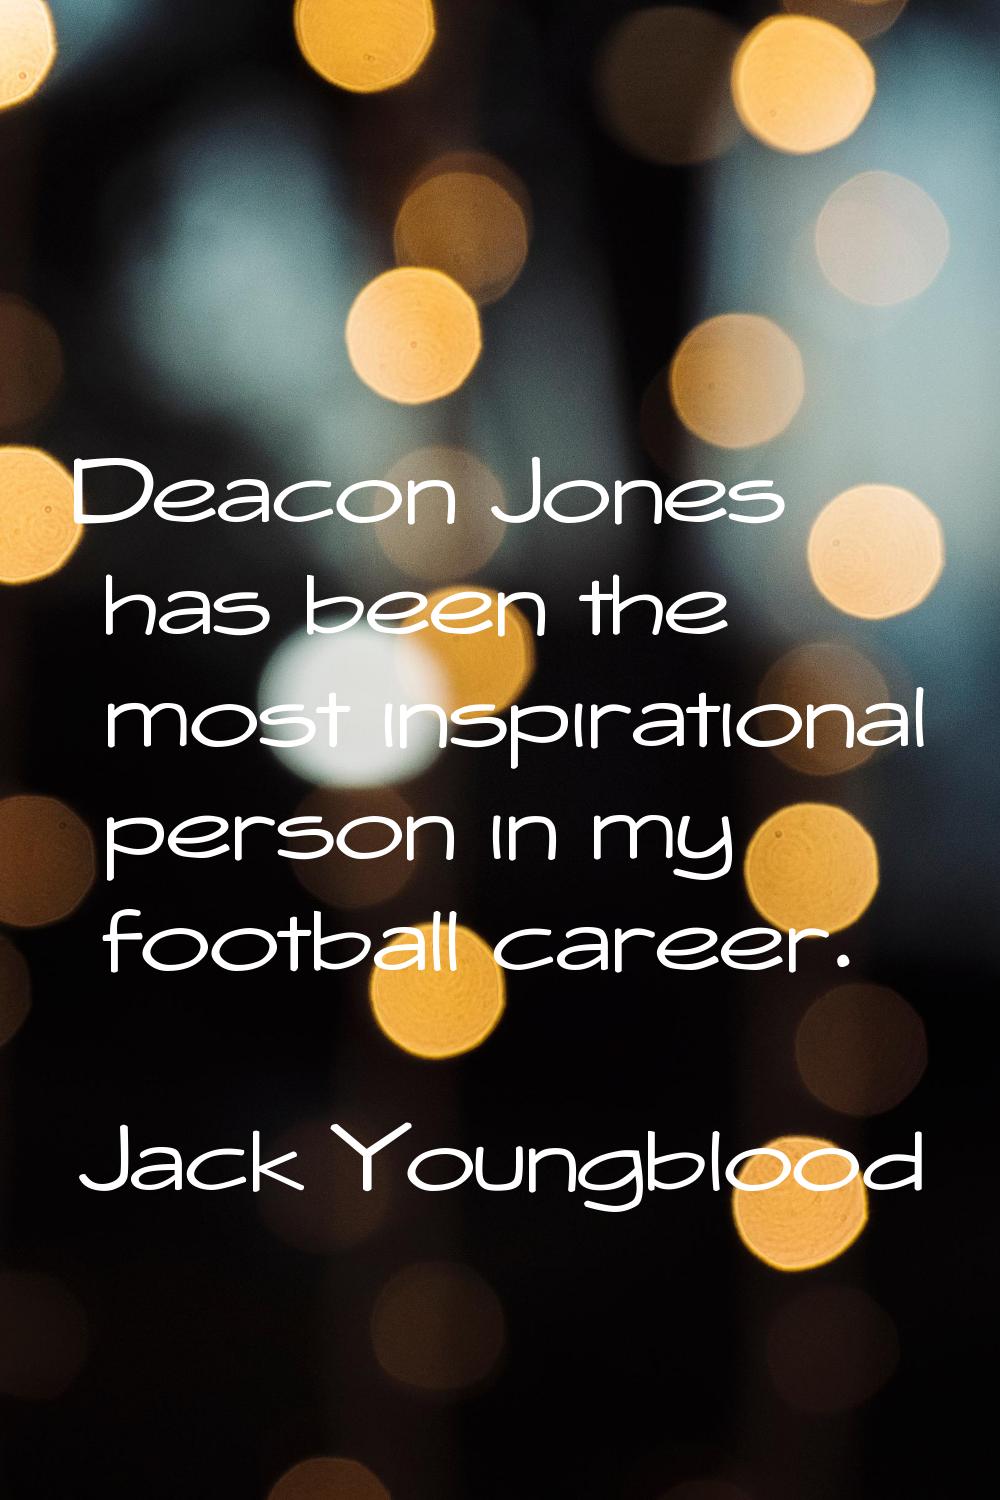 Deacon Jones has been the most inspirational person in my football career.